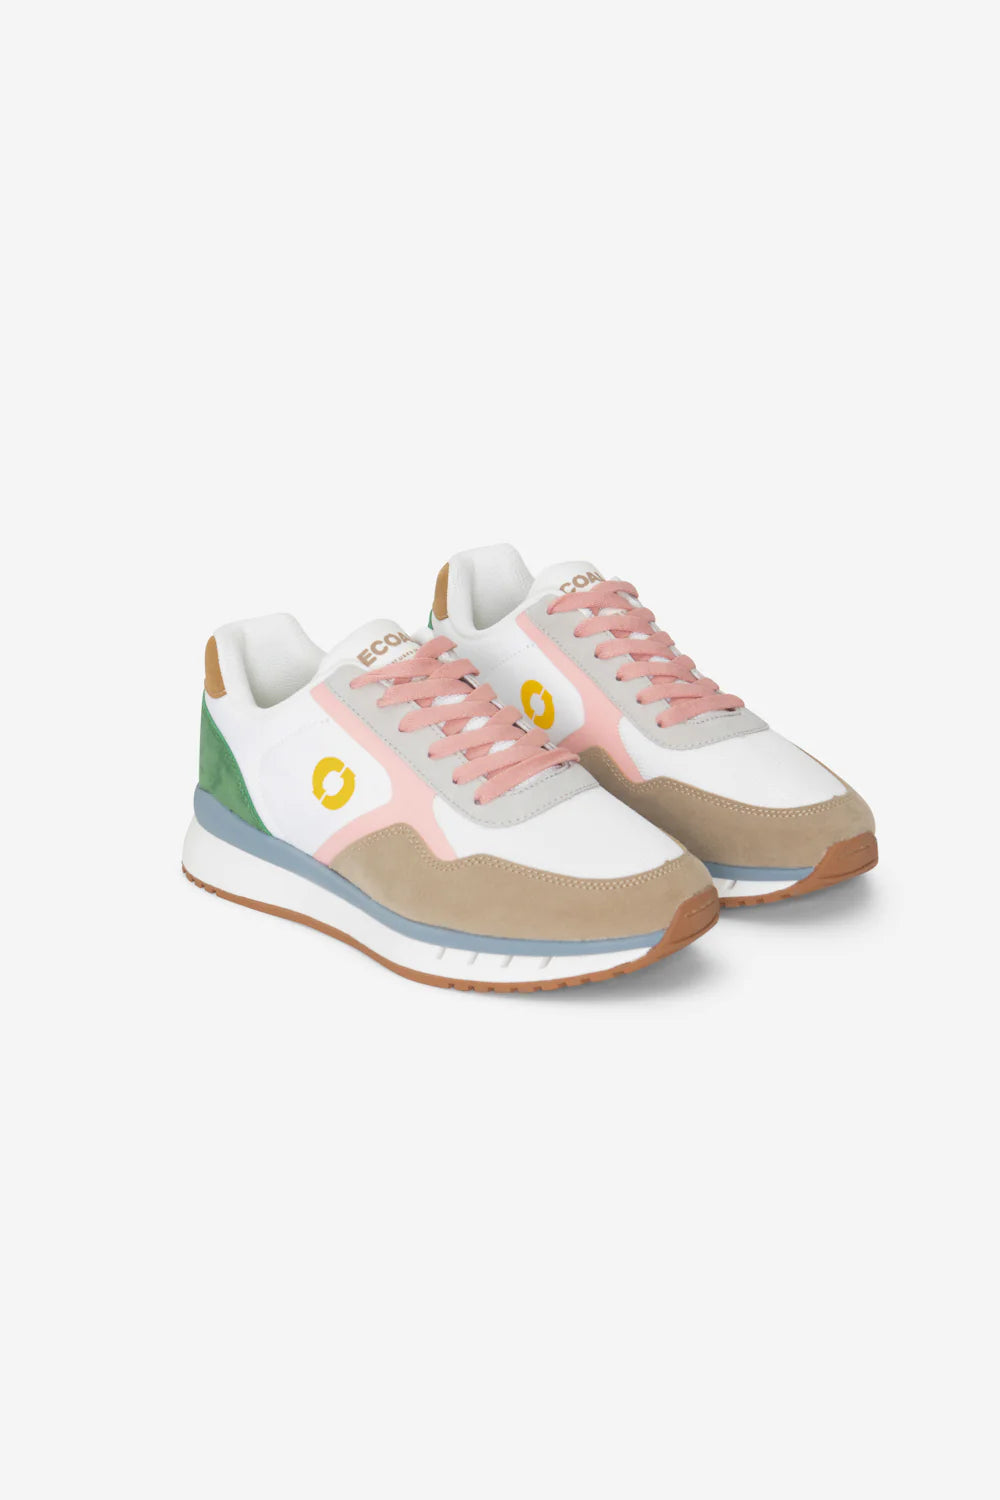 Ecoalf W's Cervinoalf Sneakers - Recycled polyester Off White/ Pink Shoes